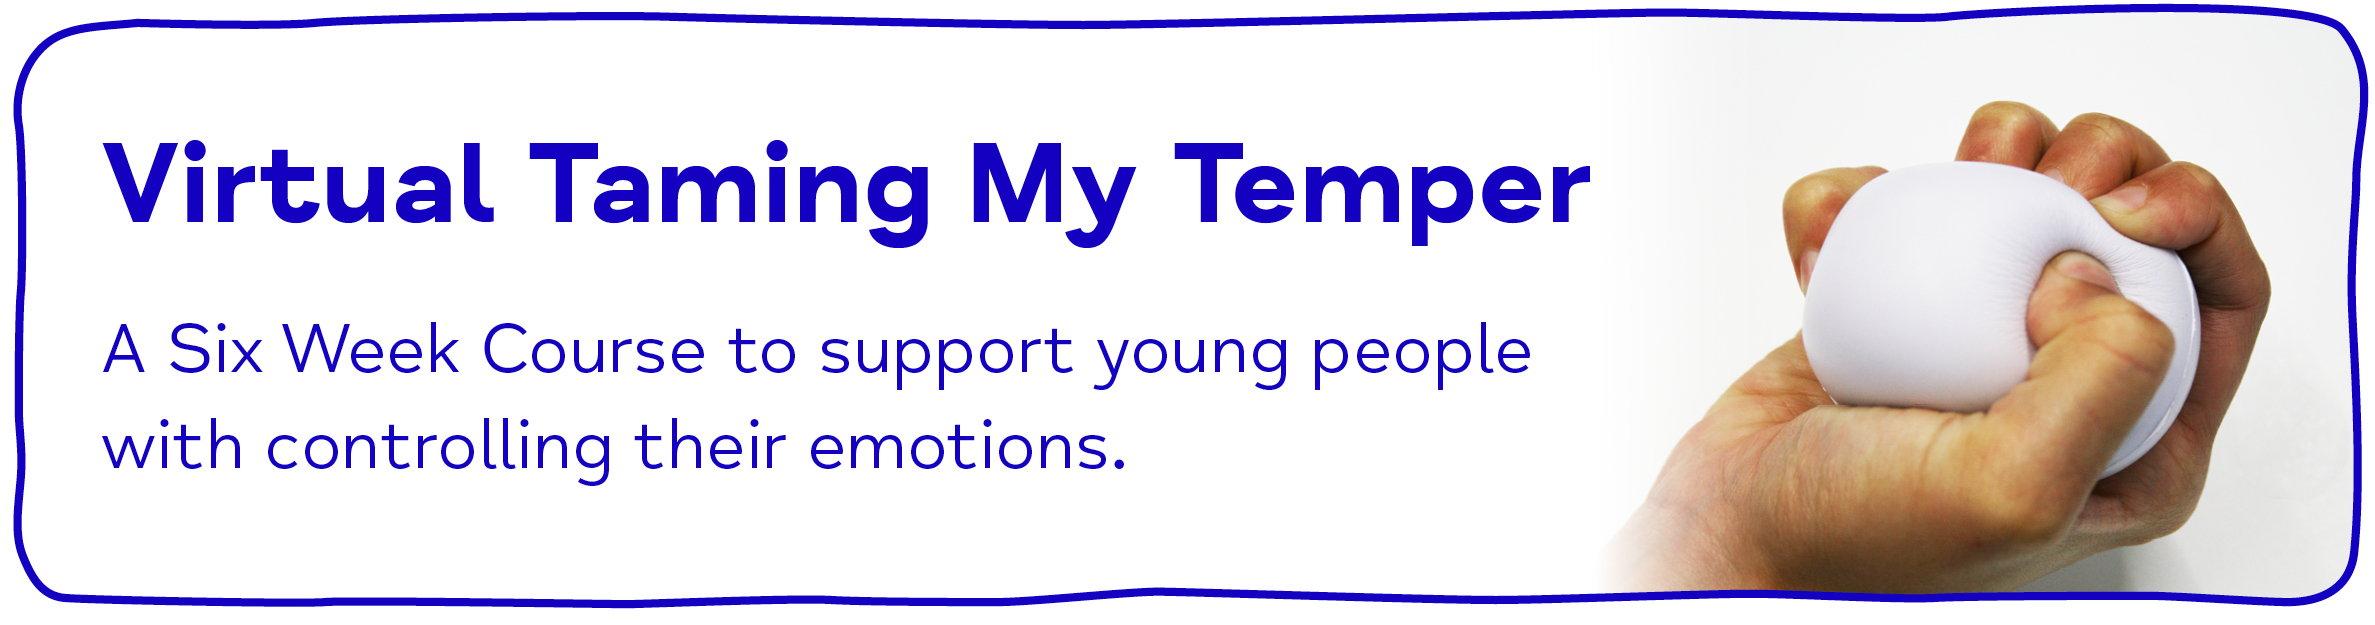 Virtual Taming My Temper - A Six Week Course to support young people with controlling their emotions.